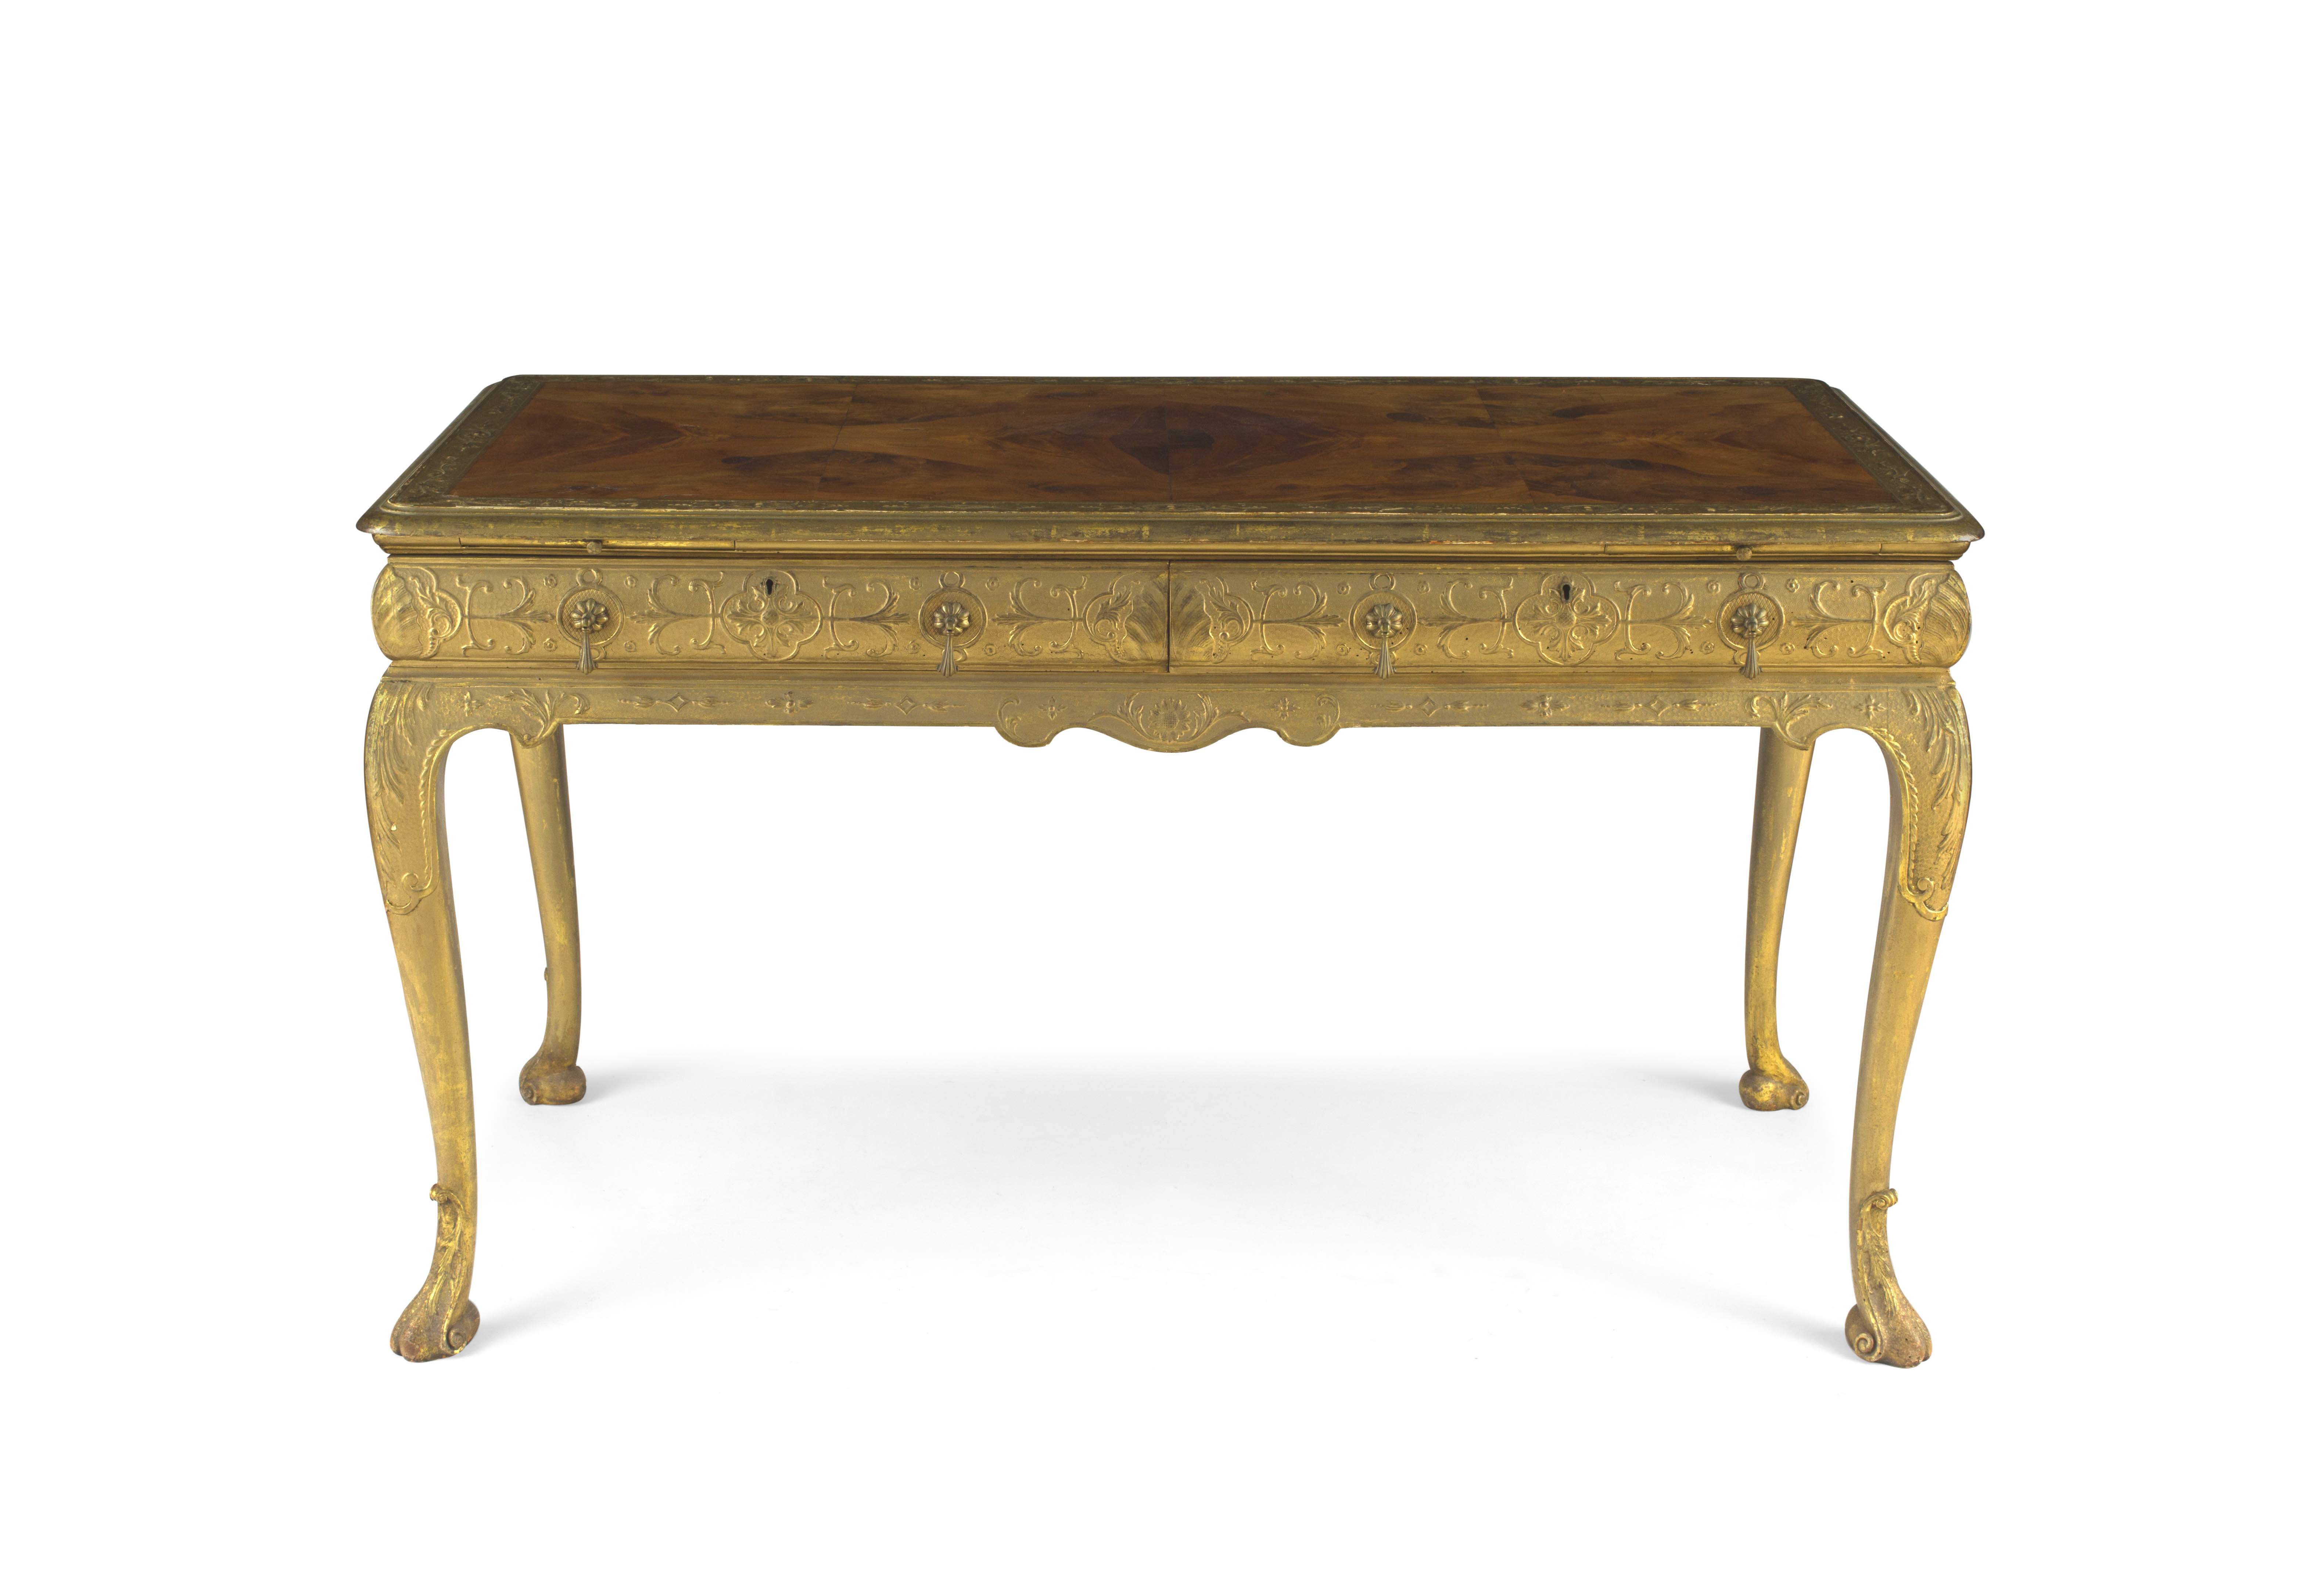 A gilt gesso and yew wood-veneered writing table, retailed by W. Charles Tozer, early 20th century